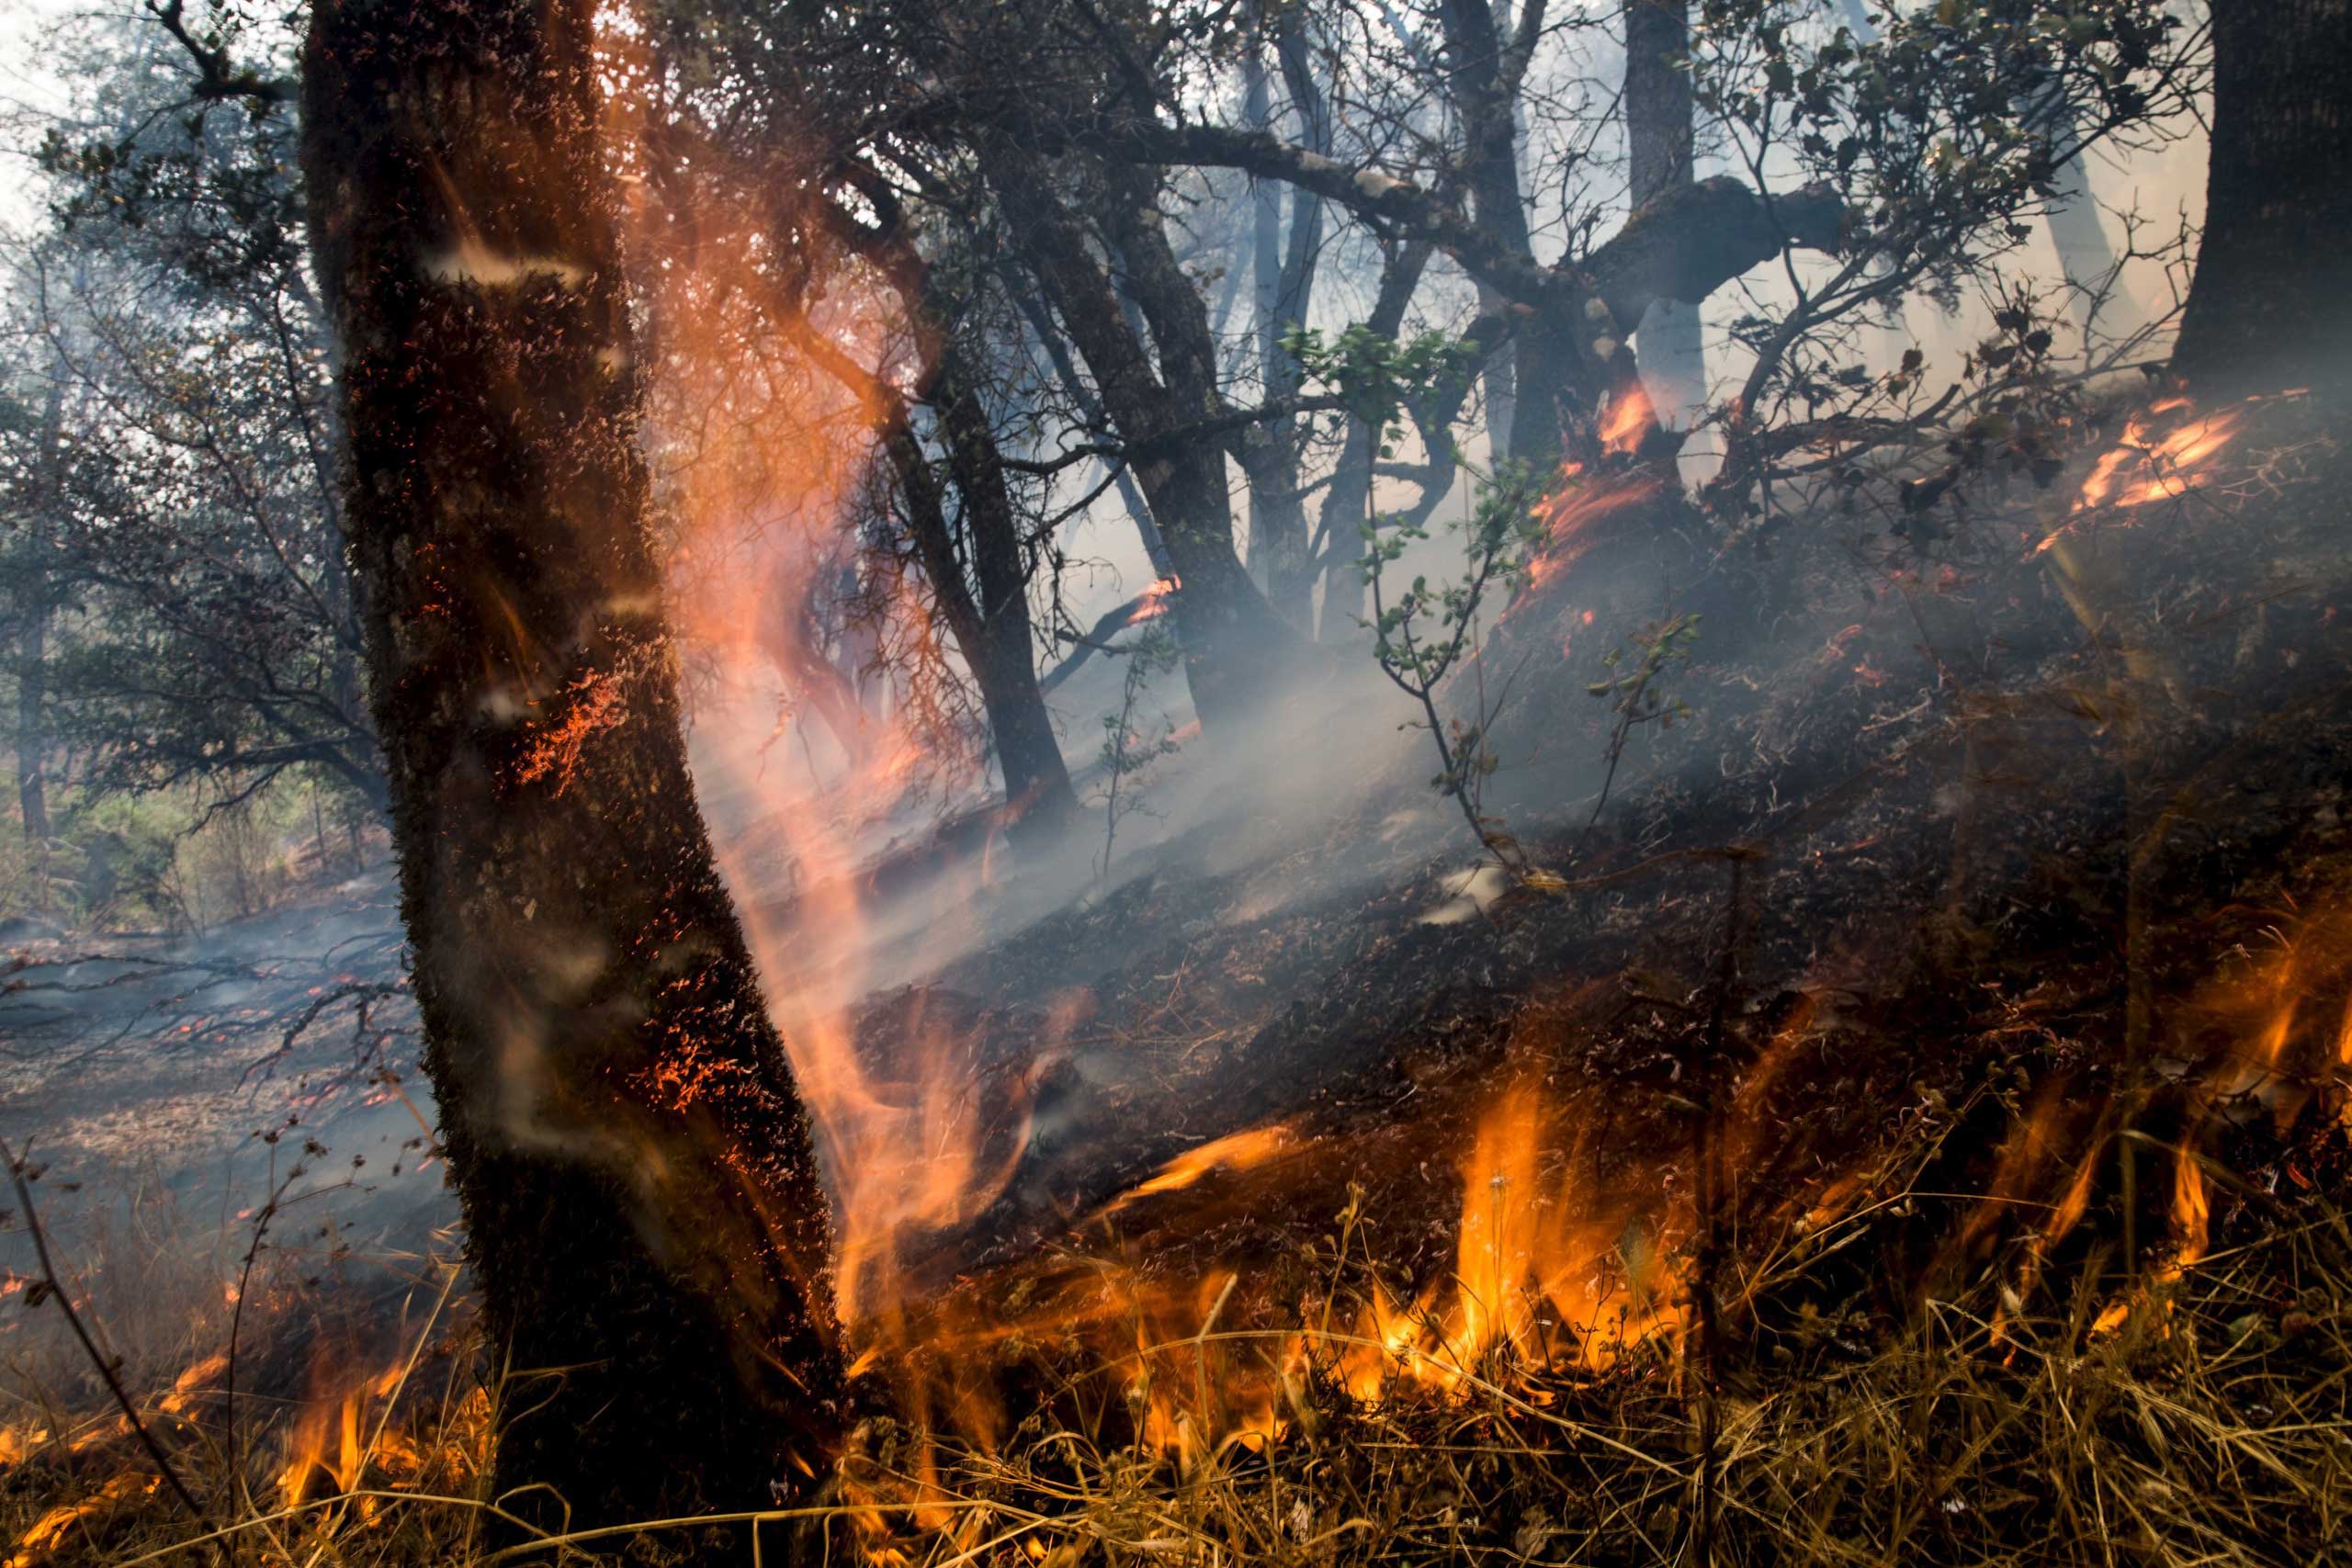 An oak tree ignites with flames during the Rocky Fire in Lake County, Calif. on July 30, 2015.